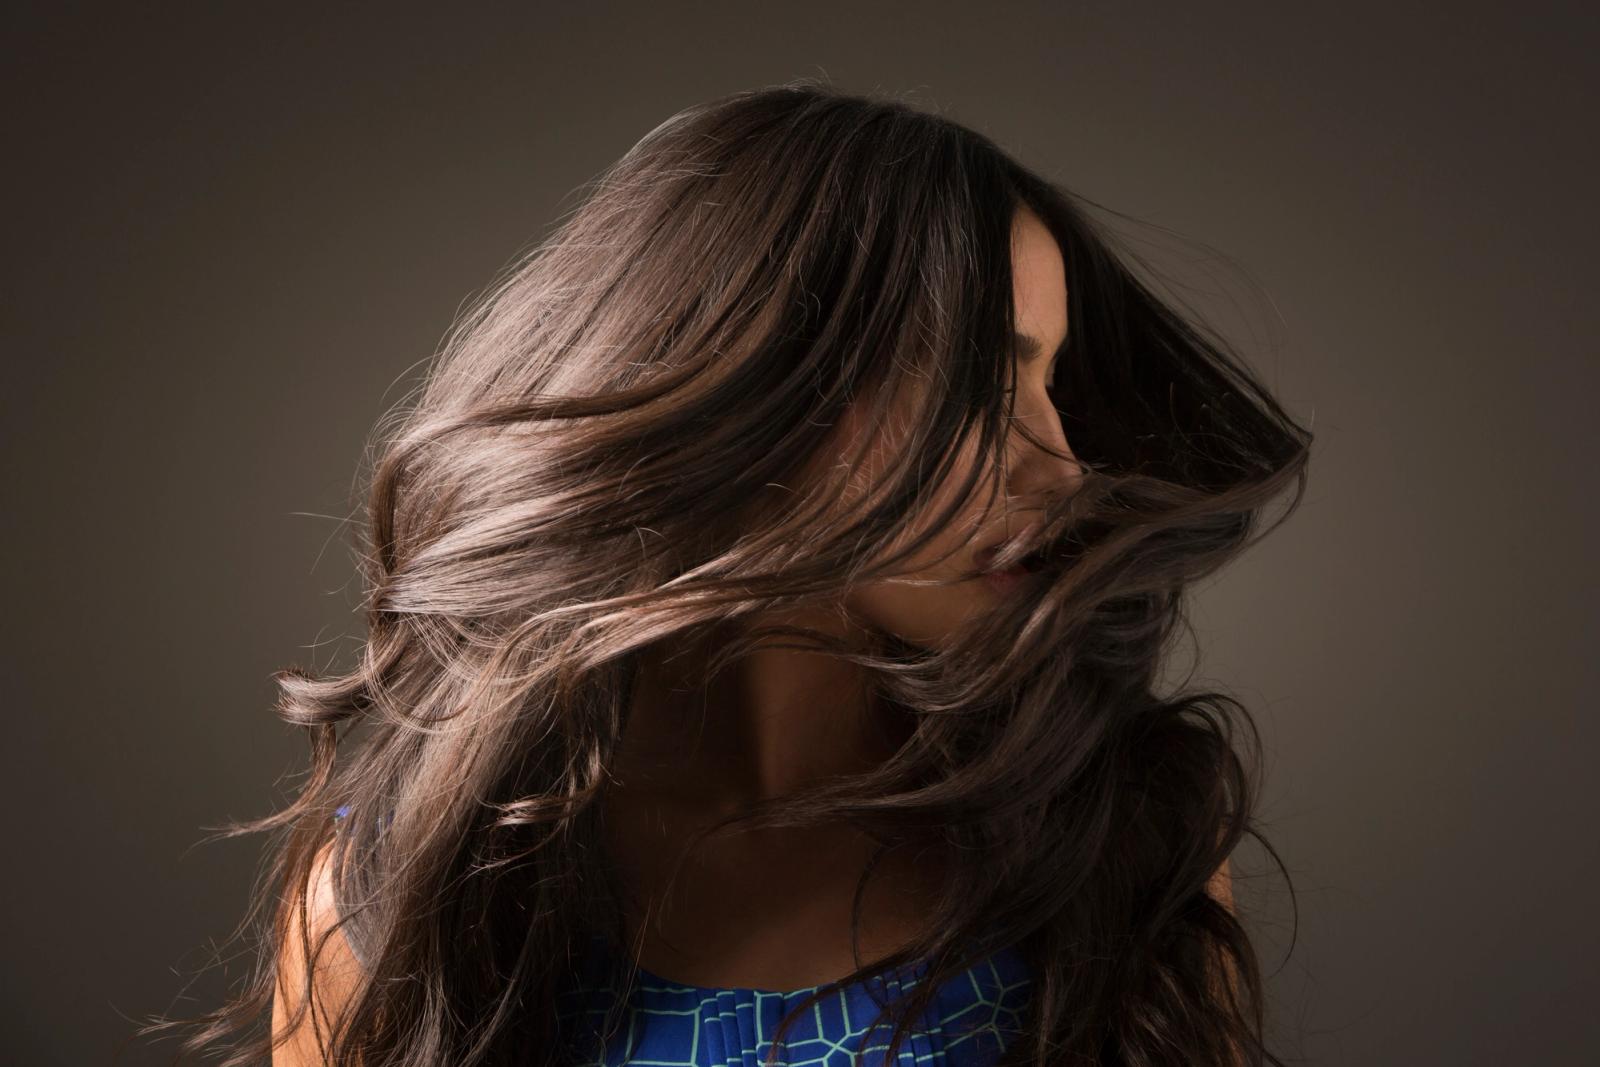 Woman with long dark brown hair at photoshoot, shaking head from side to side.